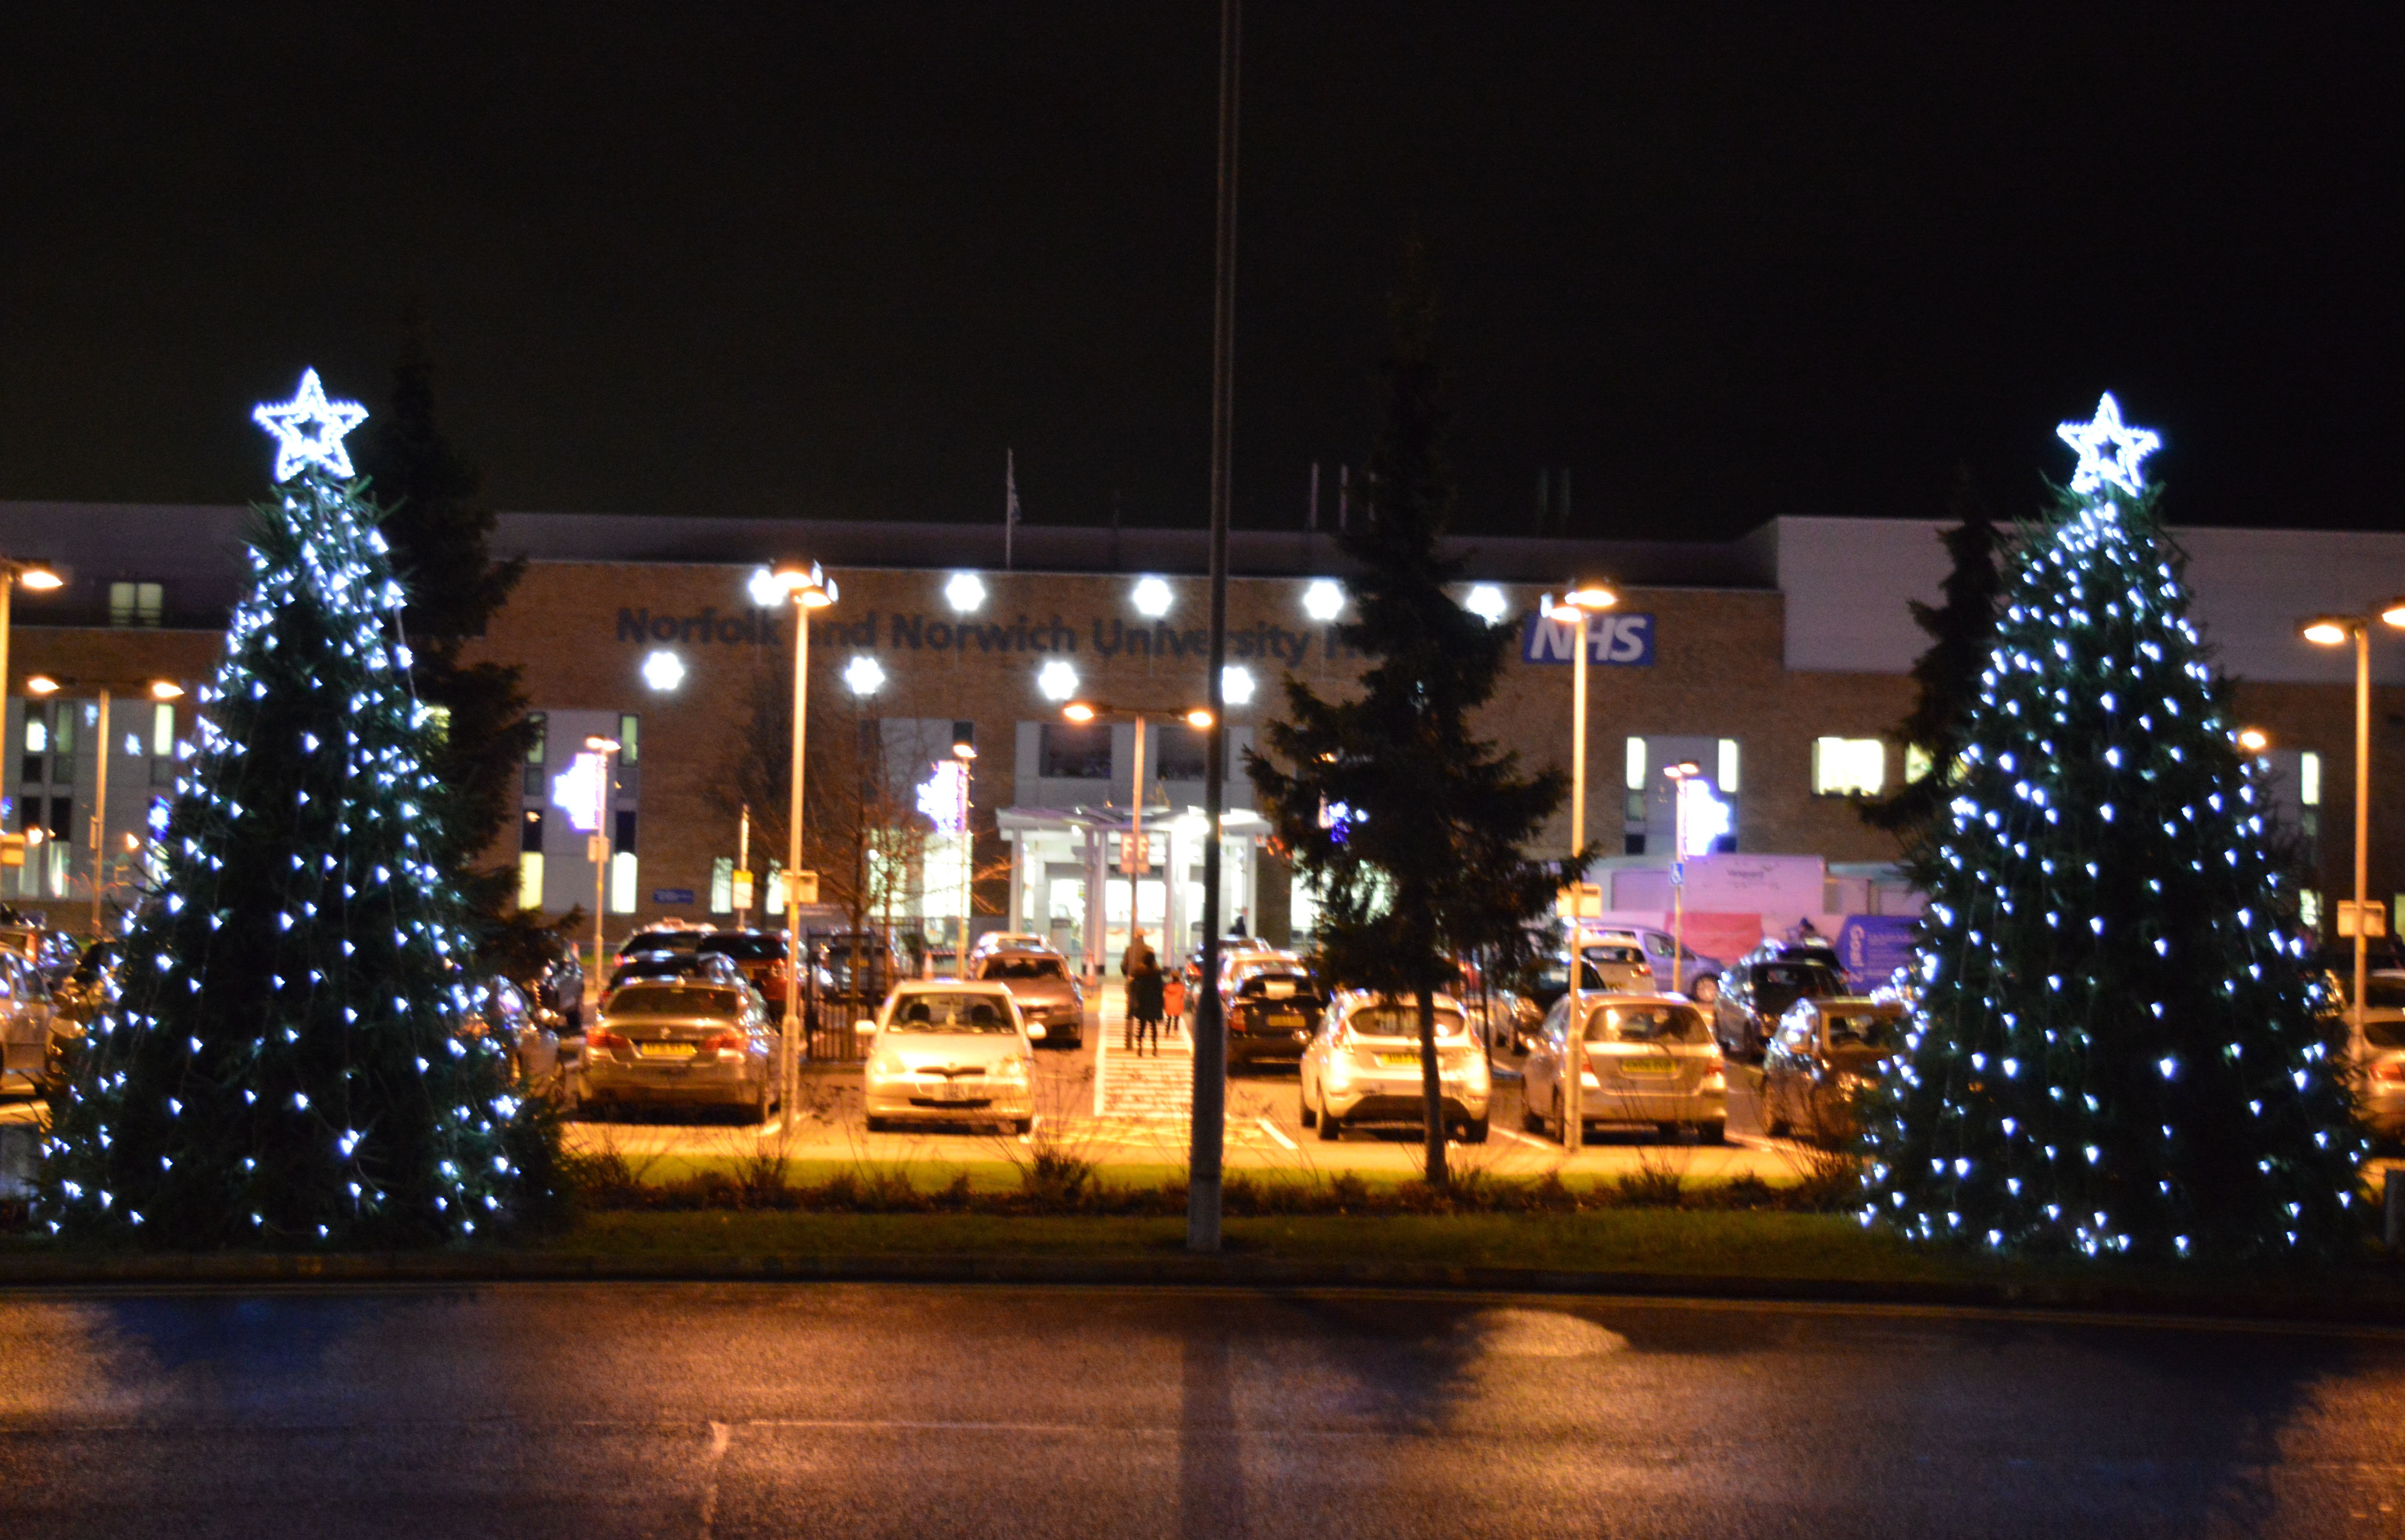 Christmas is coming to the NNUH